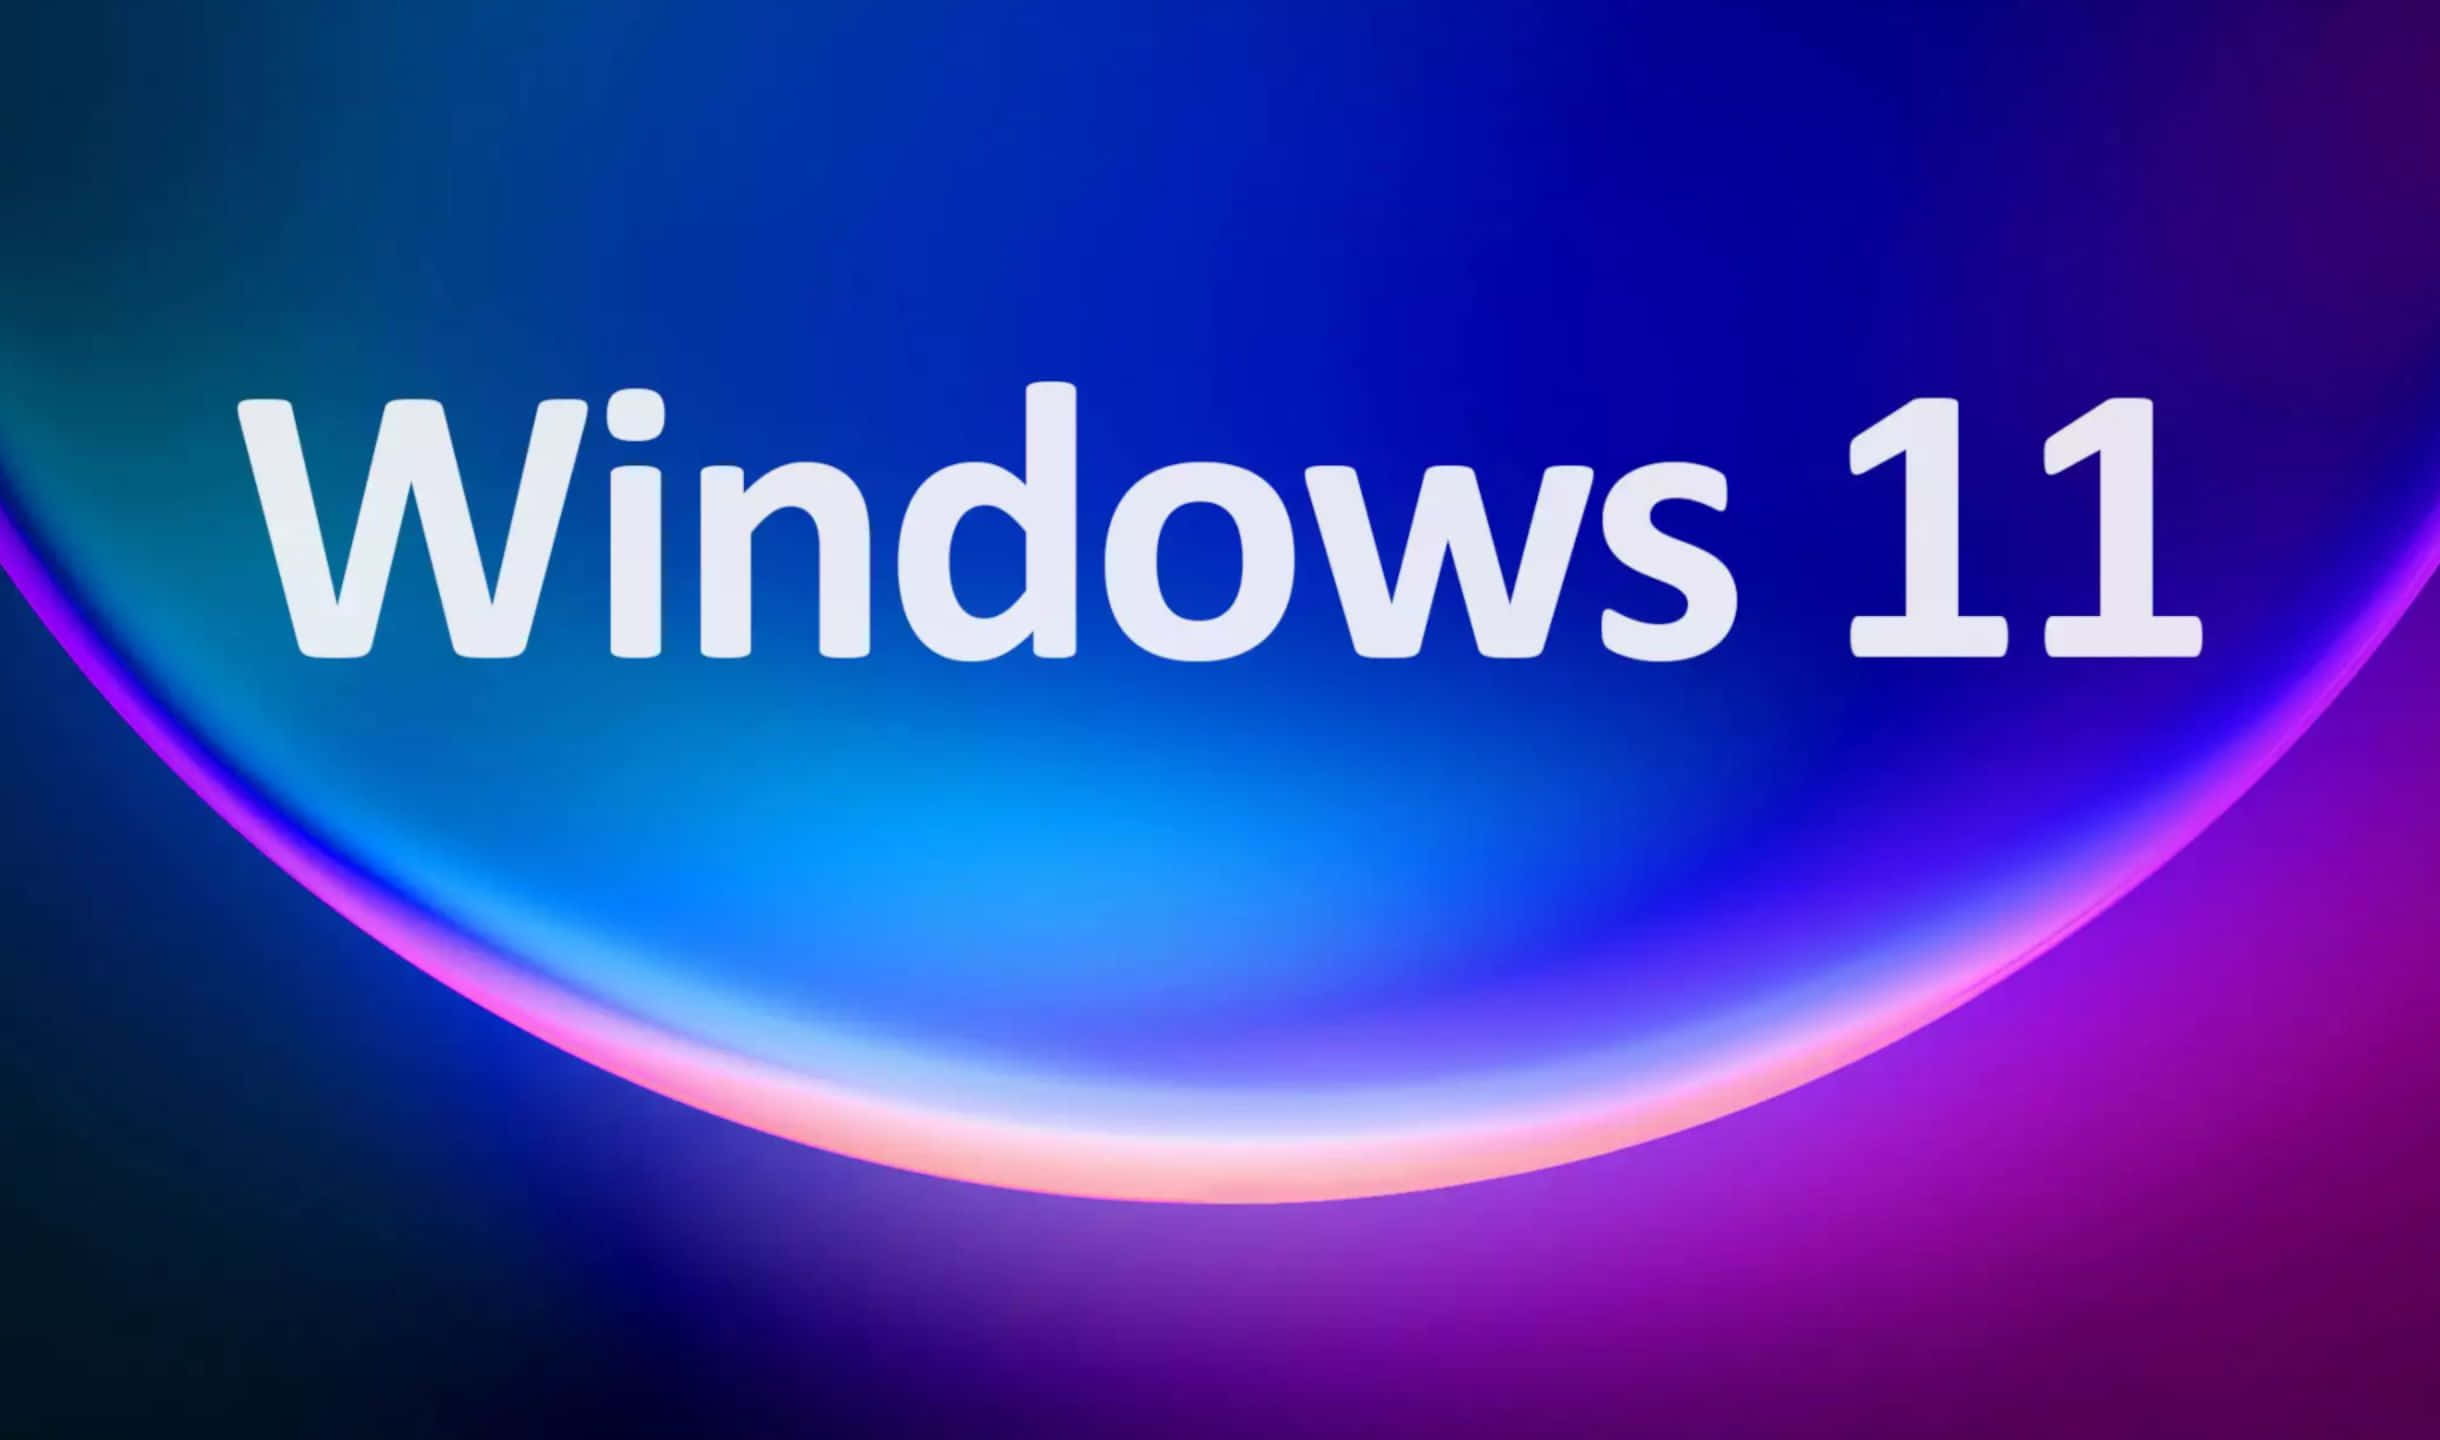 Get Ready for Windows 11